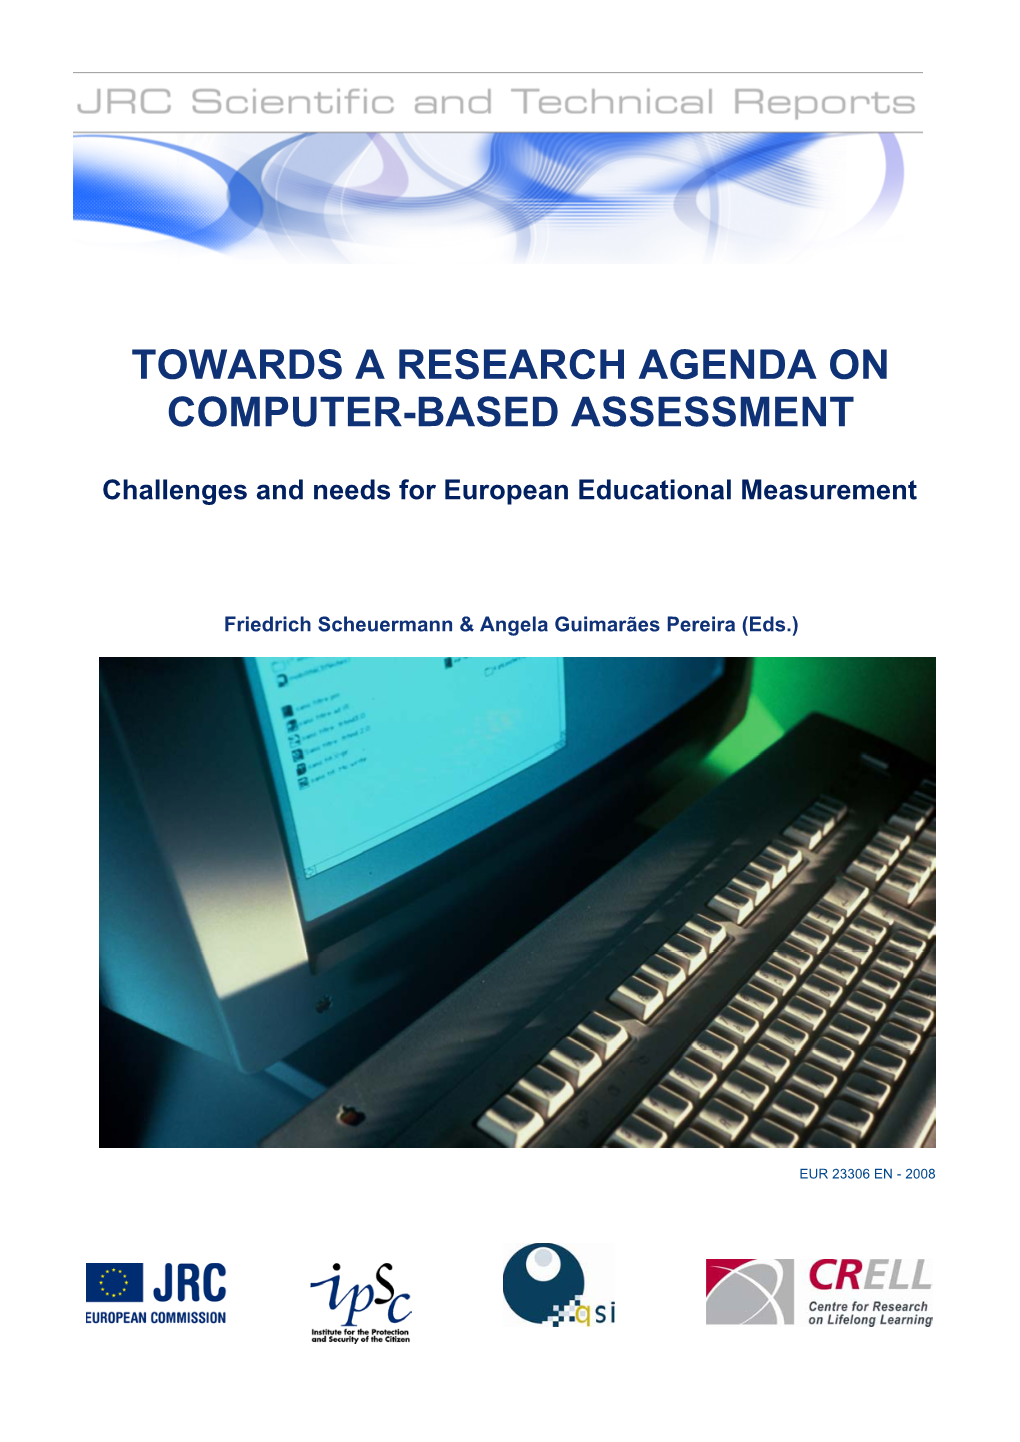 Towards a Research Agenda on Computer-Based